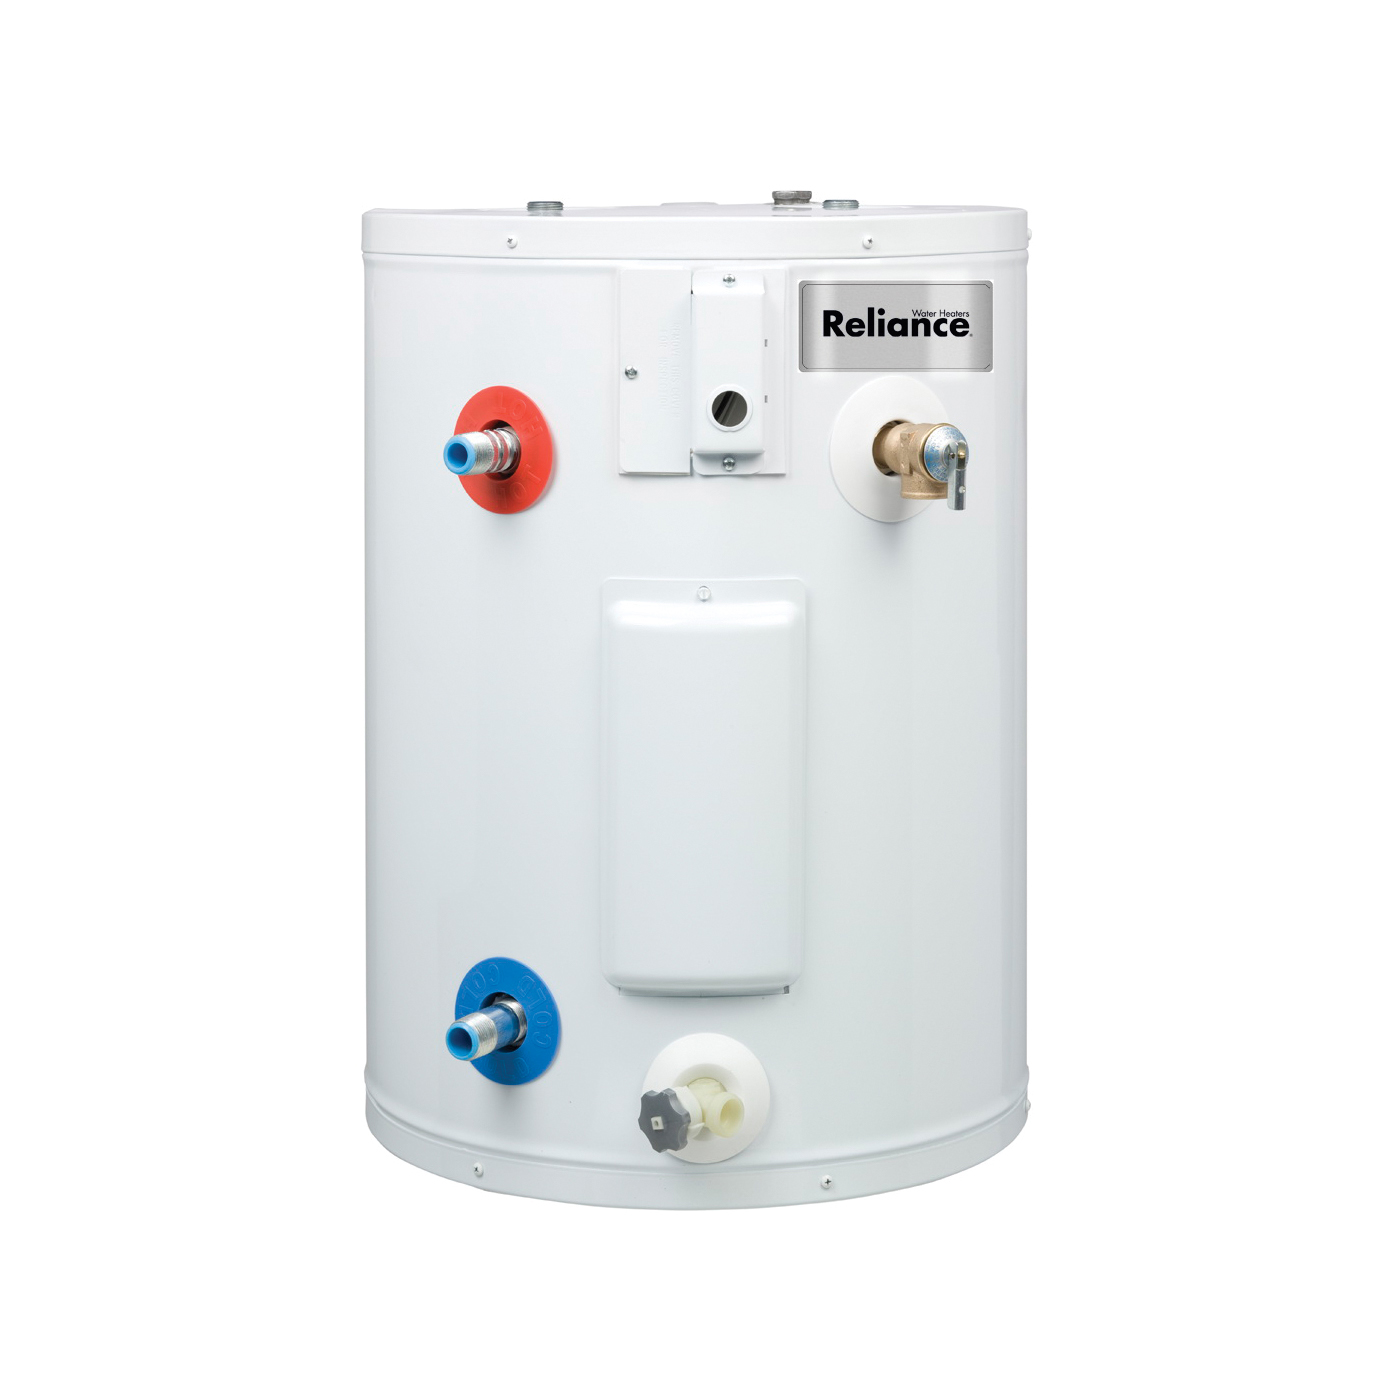 Reliance 6 20 SOMS K Electric Water Heater, 120 V, 1650 W, 20 gal Tank, Copper Heating Element, Wall Mounting